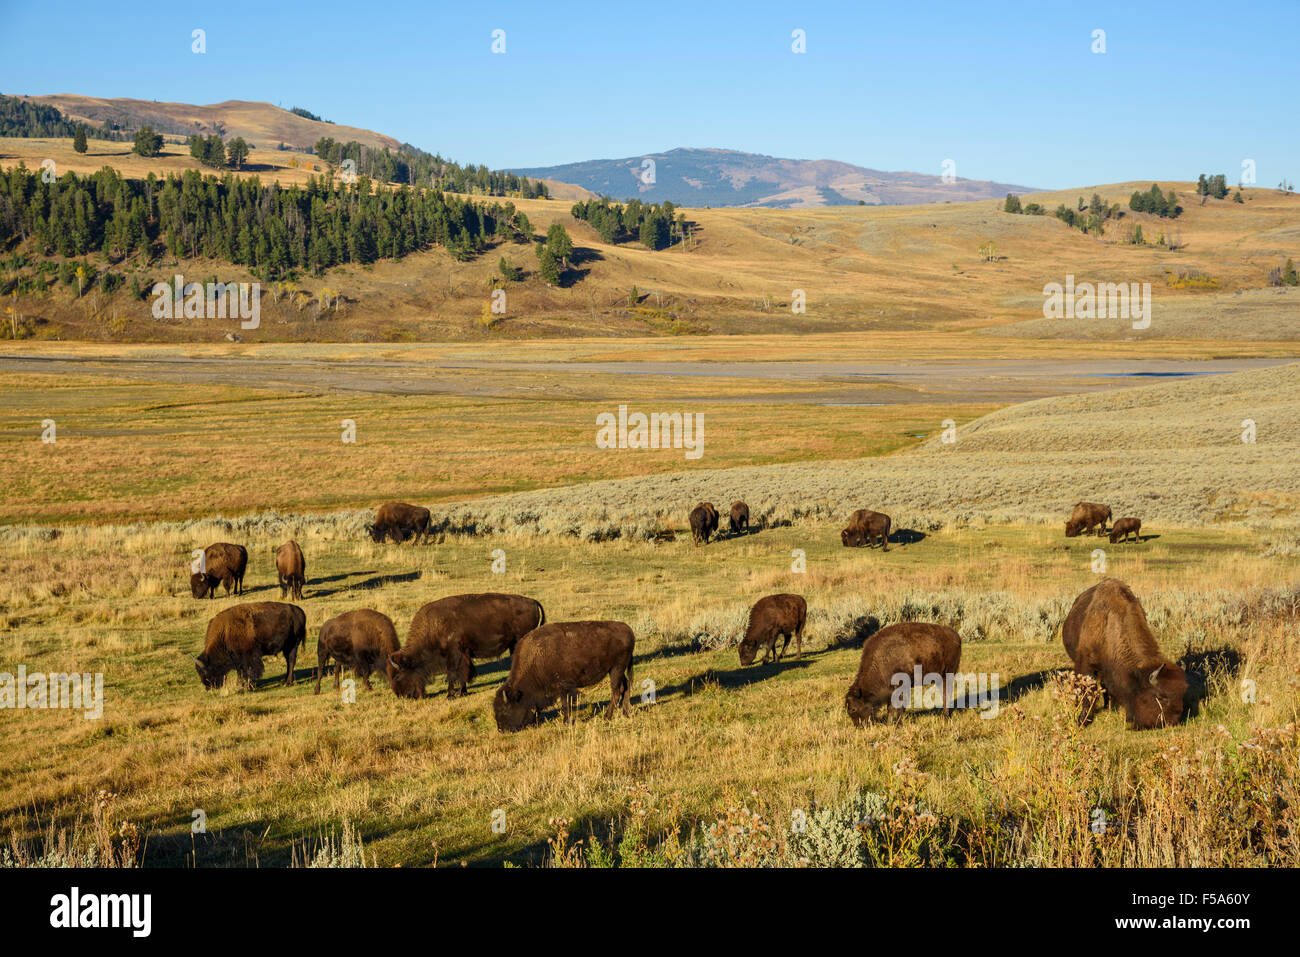 American Bison, Bison bison, (buffalo) in Lamar Valley, Yellowstone National Park, Wyoming, USA Stock Photo